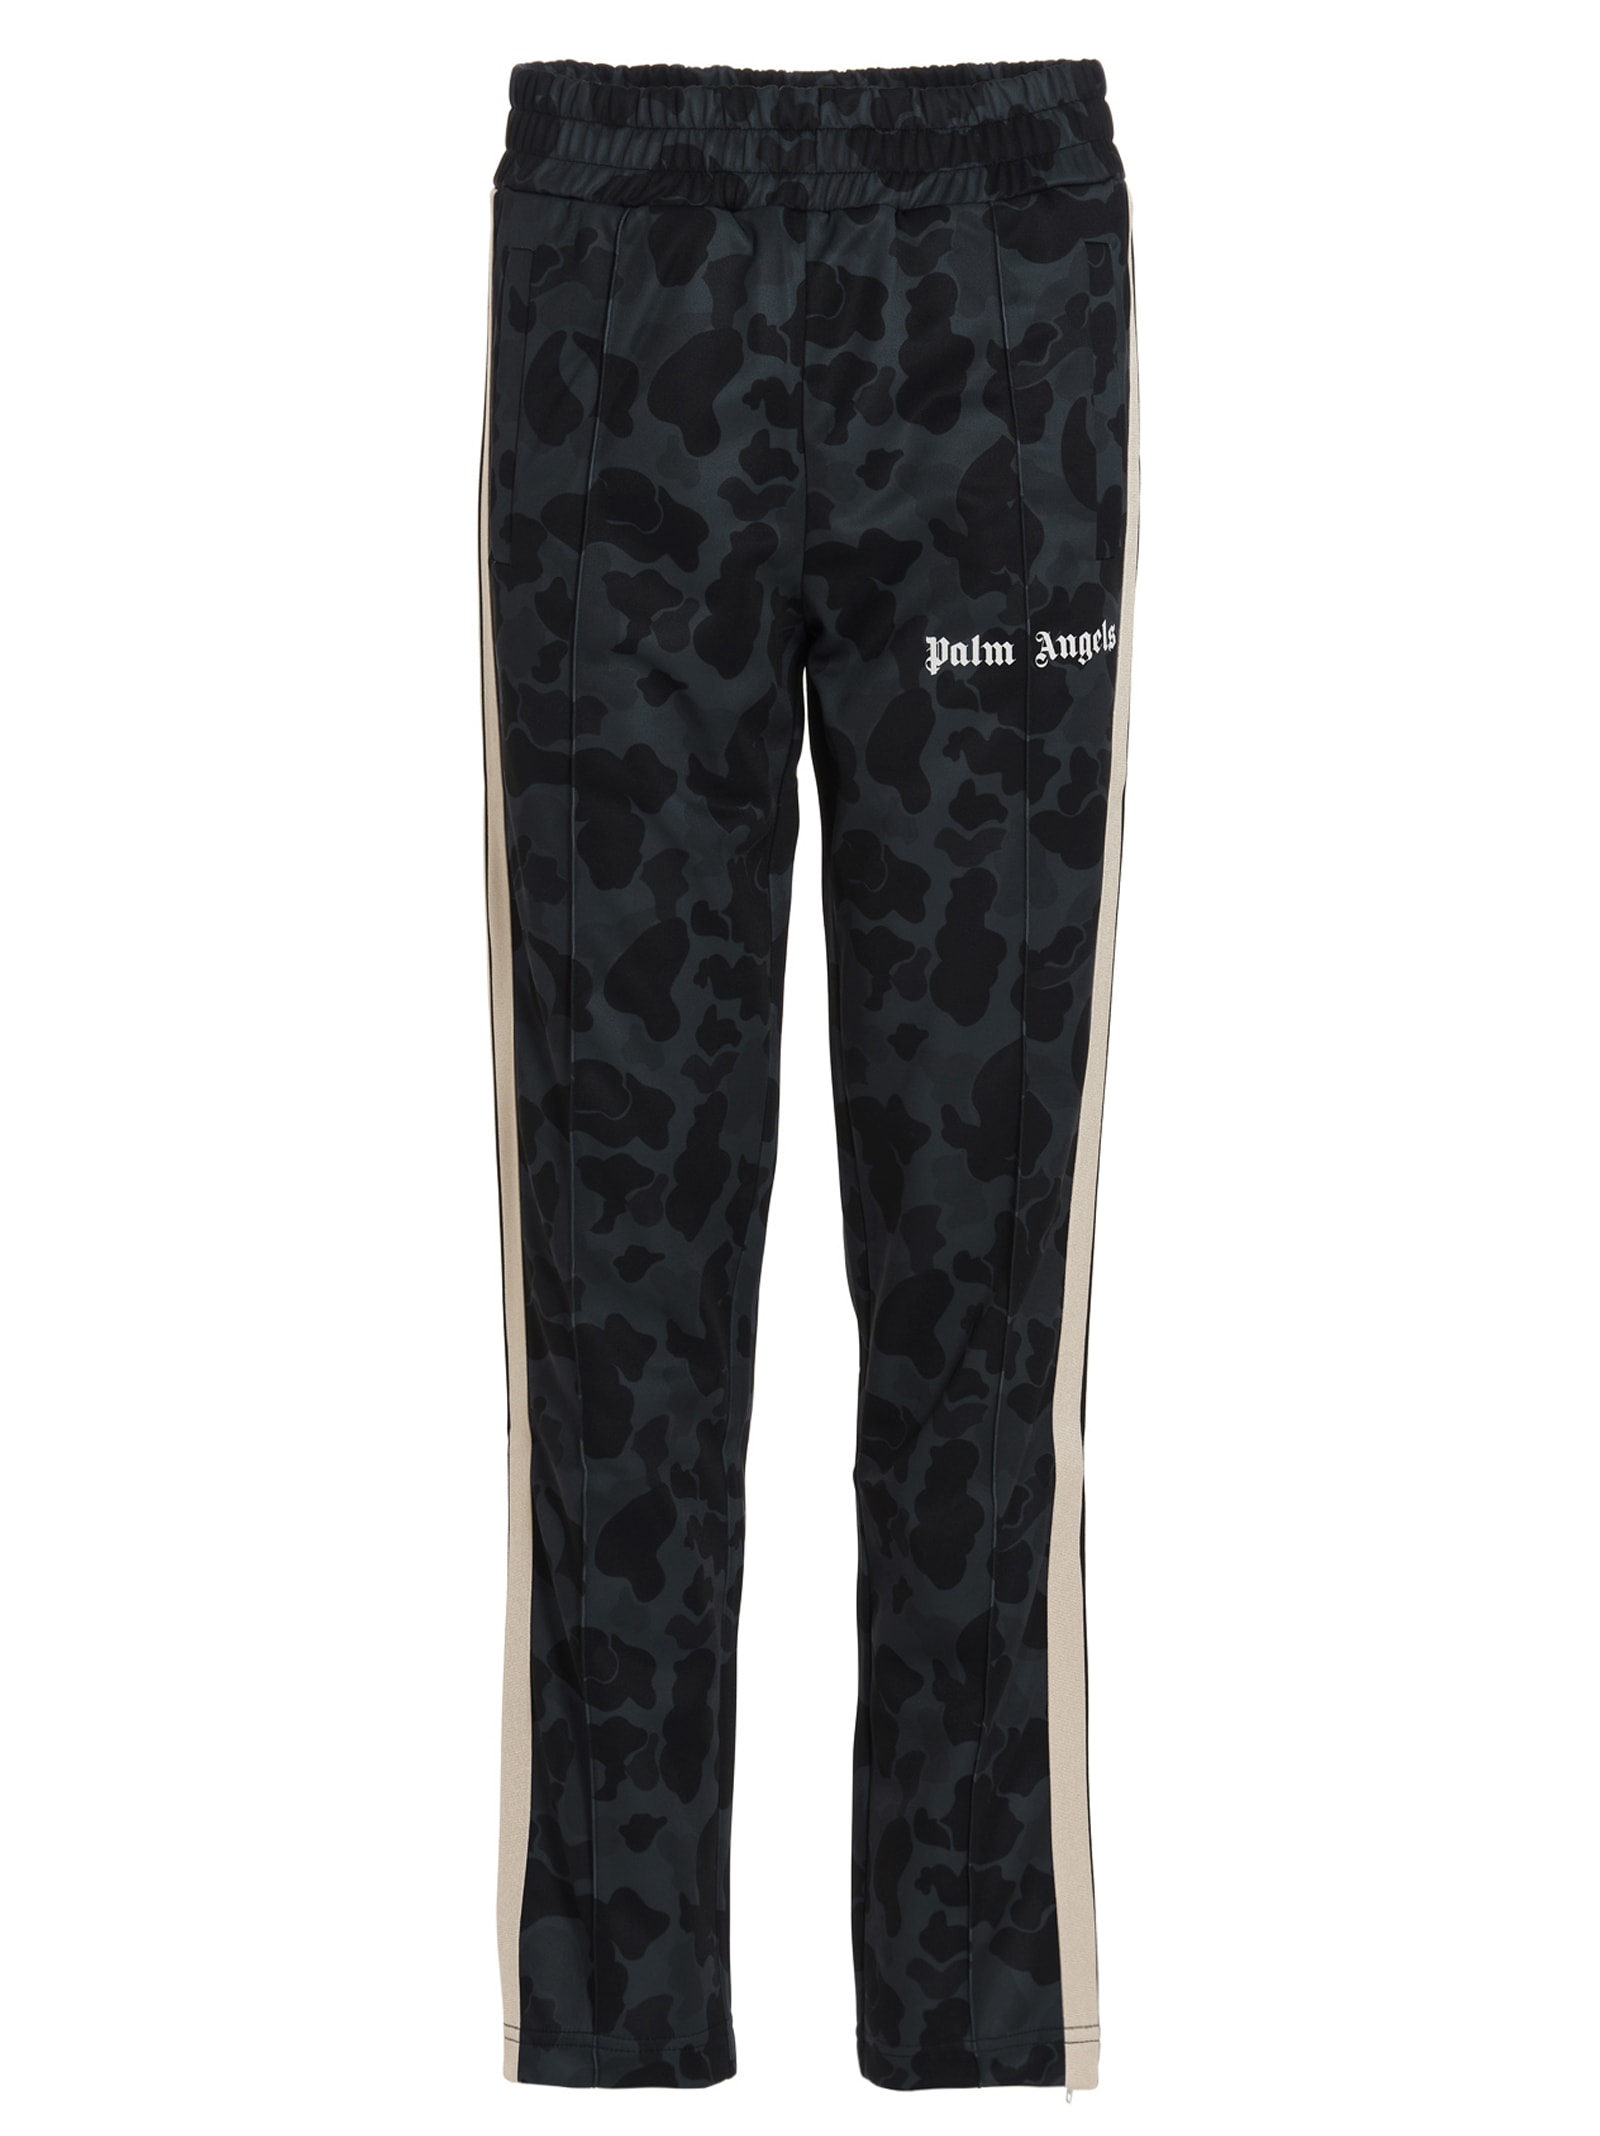 Palm Angels Camouflage Joggers